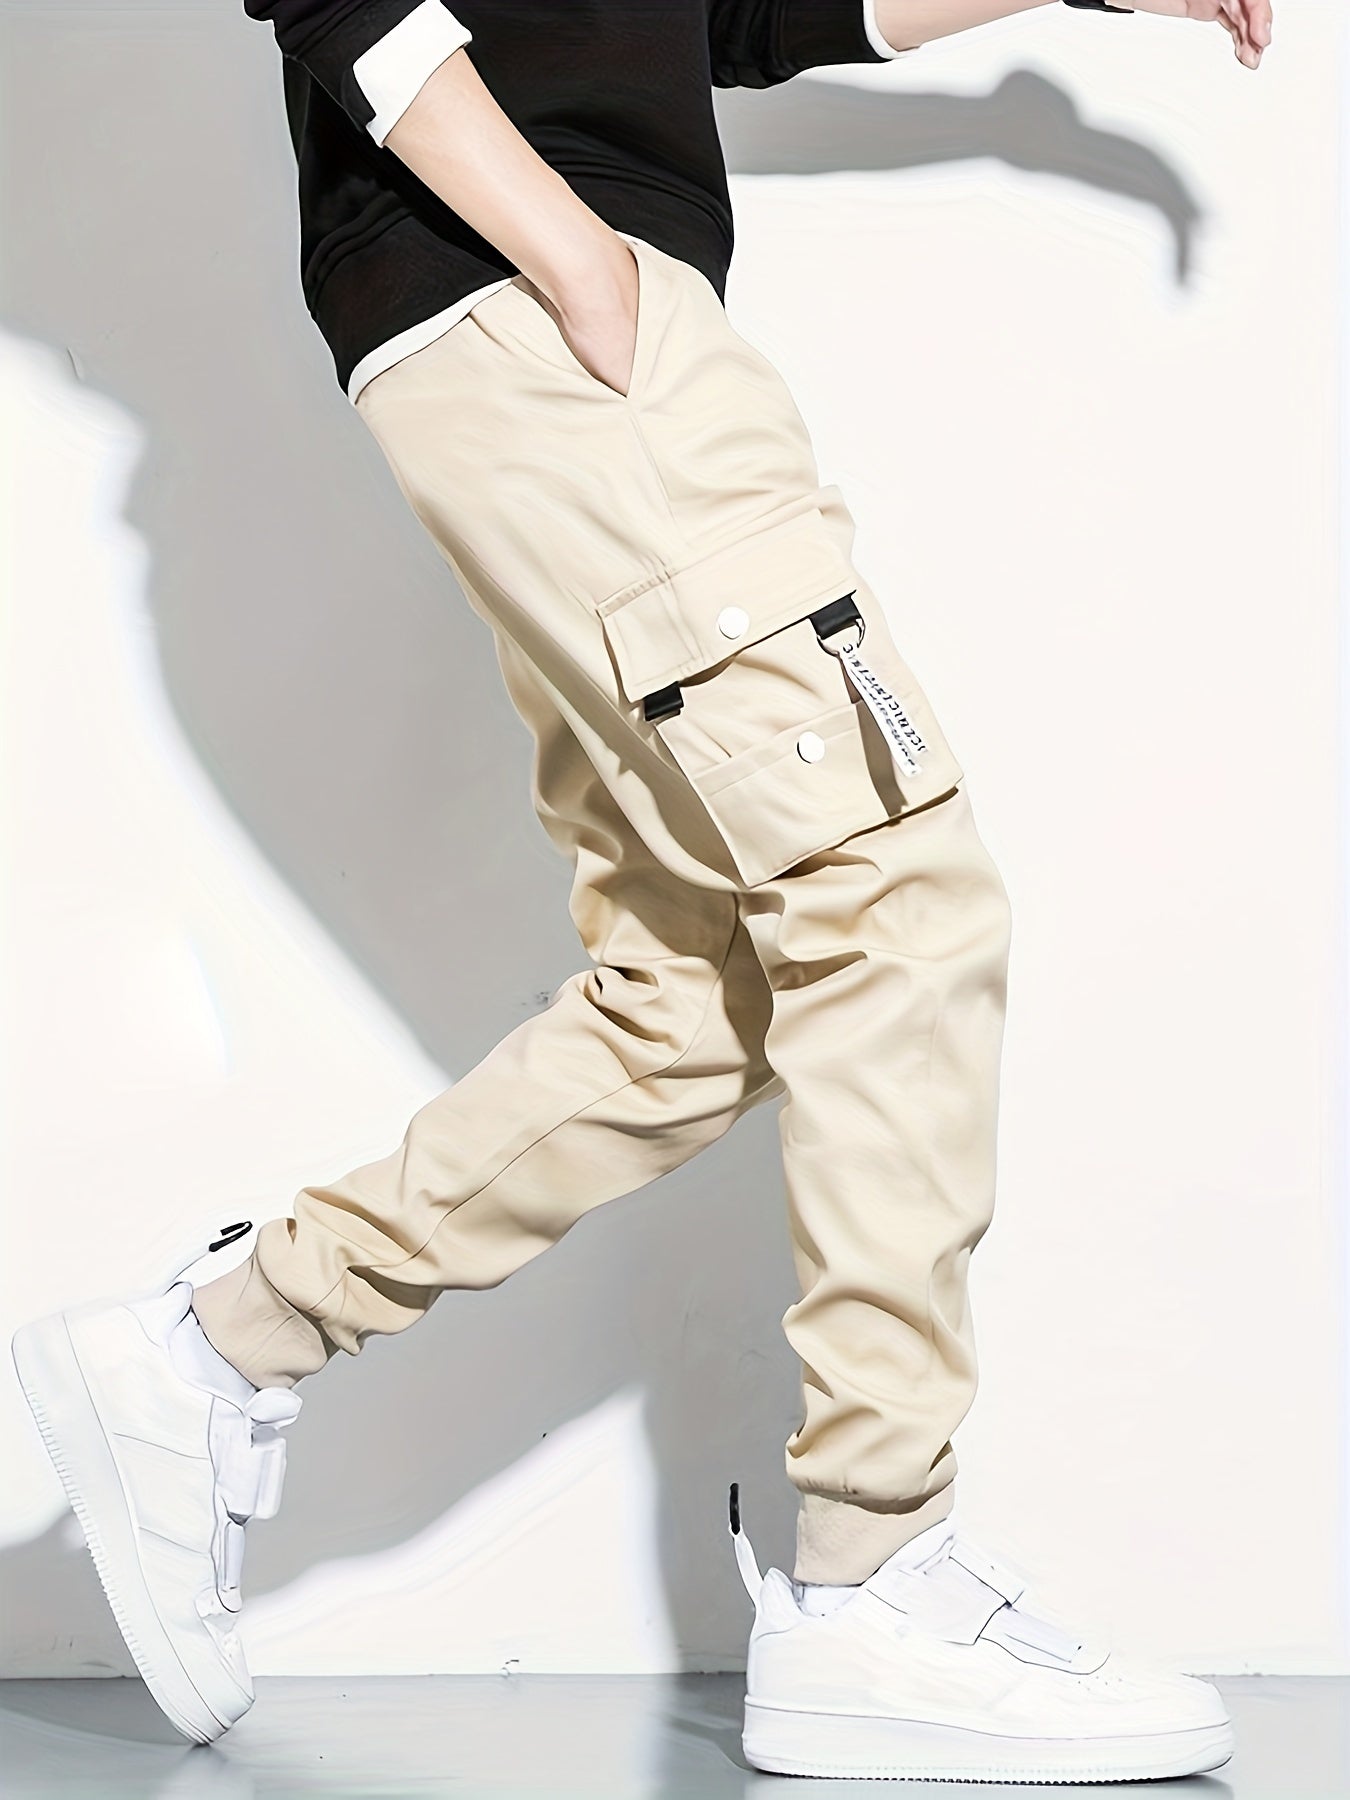 「lovevop」Classic Design Multi Pocket Cargo Pants, Men's Casual Loose Fit Drawstring Solid Color Cargo Pants/Joggers For Spring Summer Outdoor